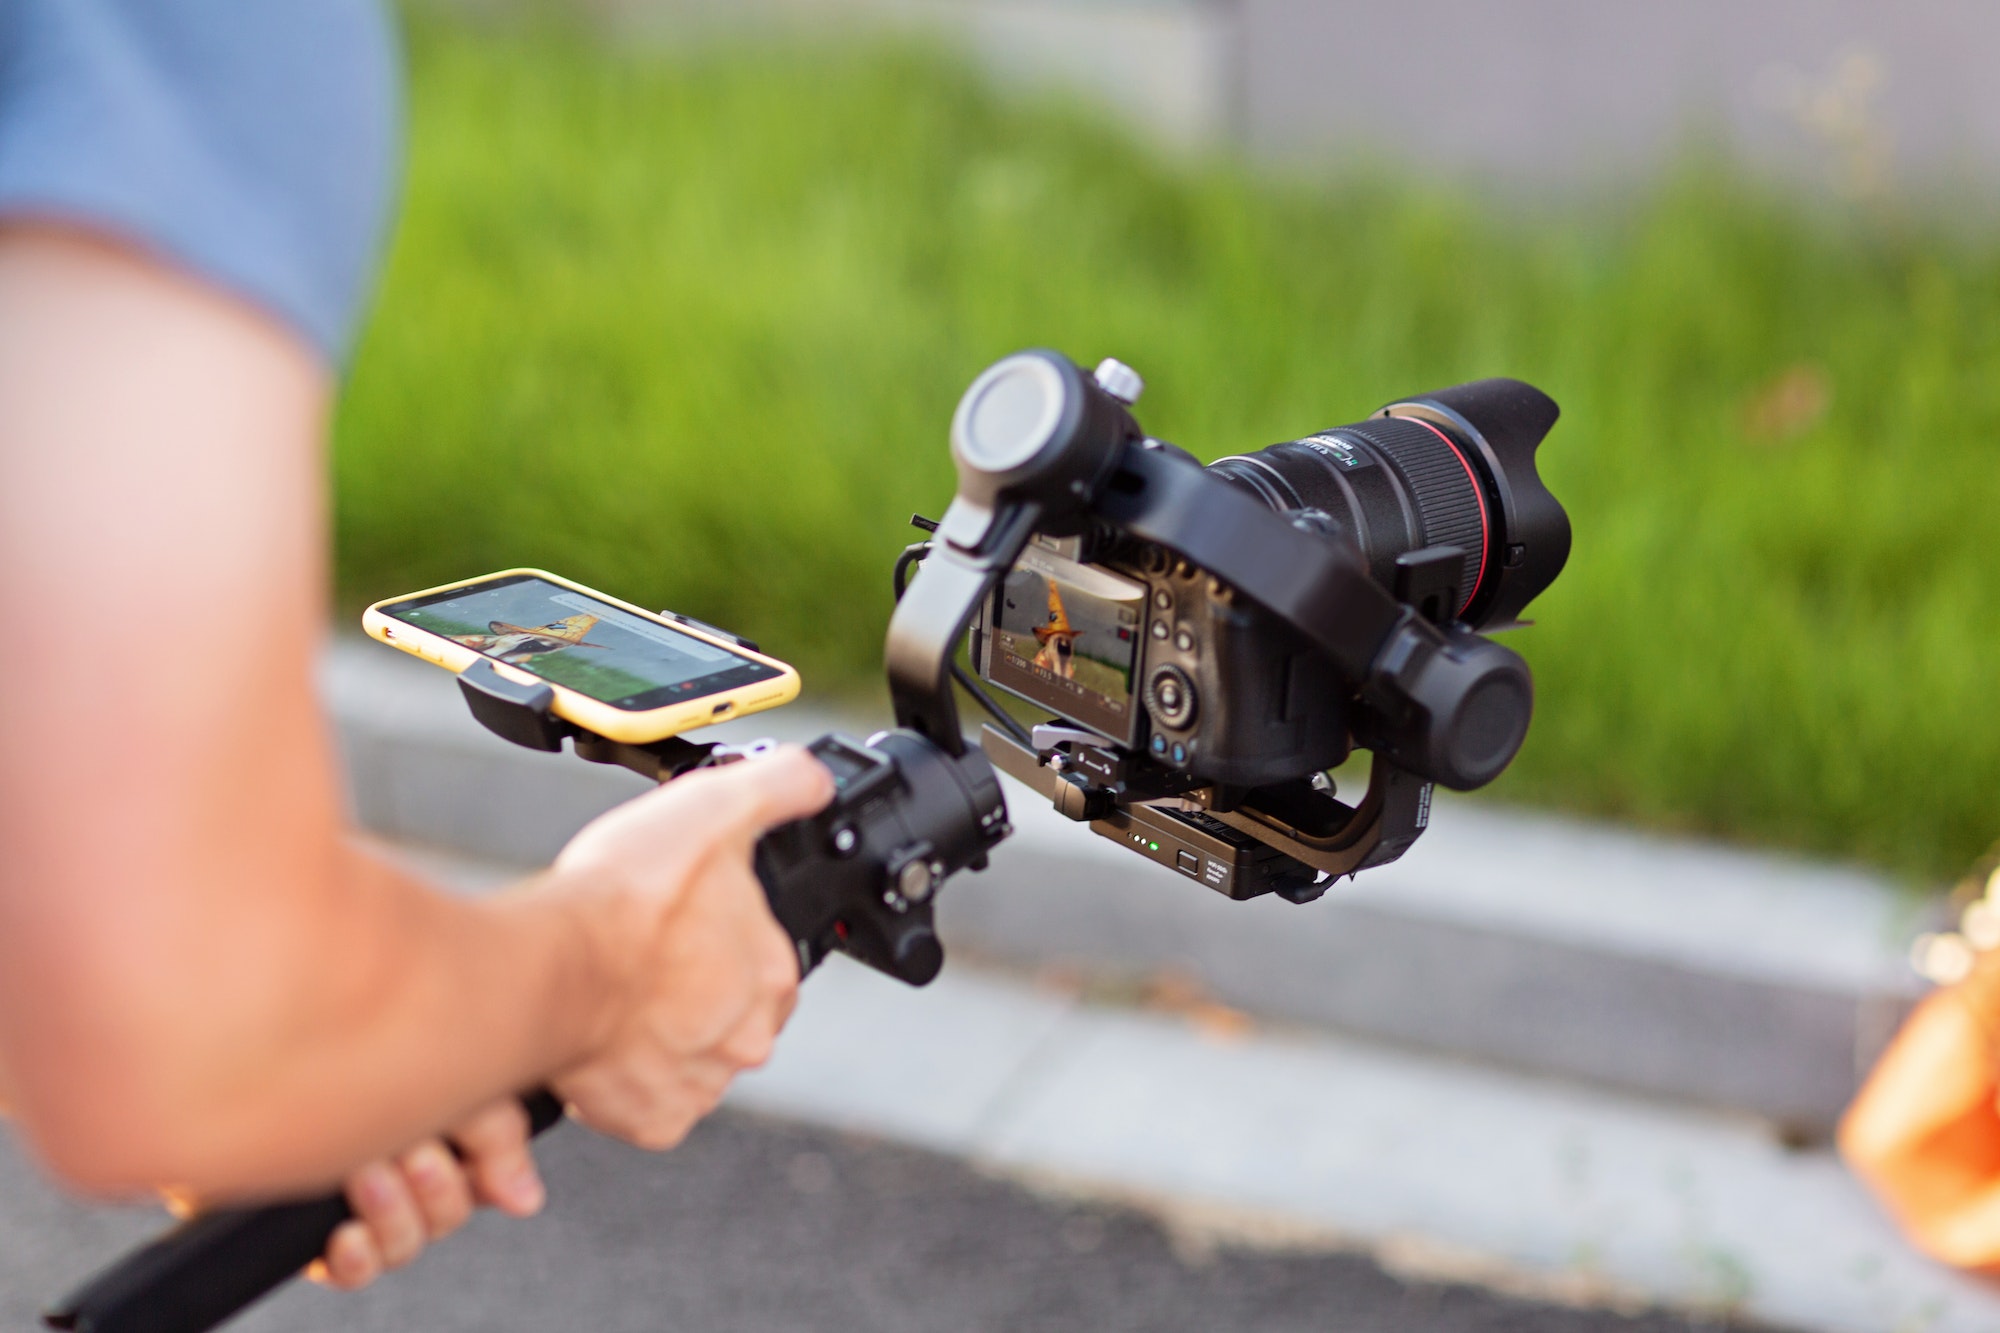 Operator using modern technology: stabilizer for camera and app on mobile phone for video streaming